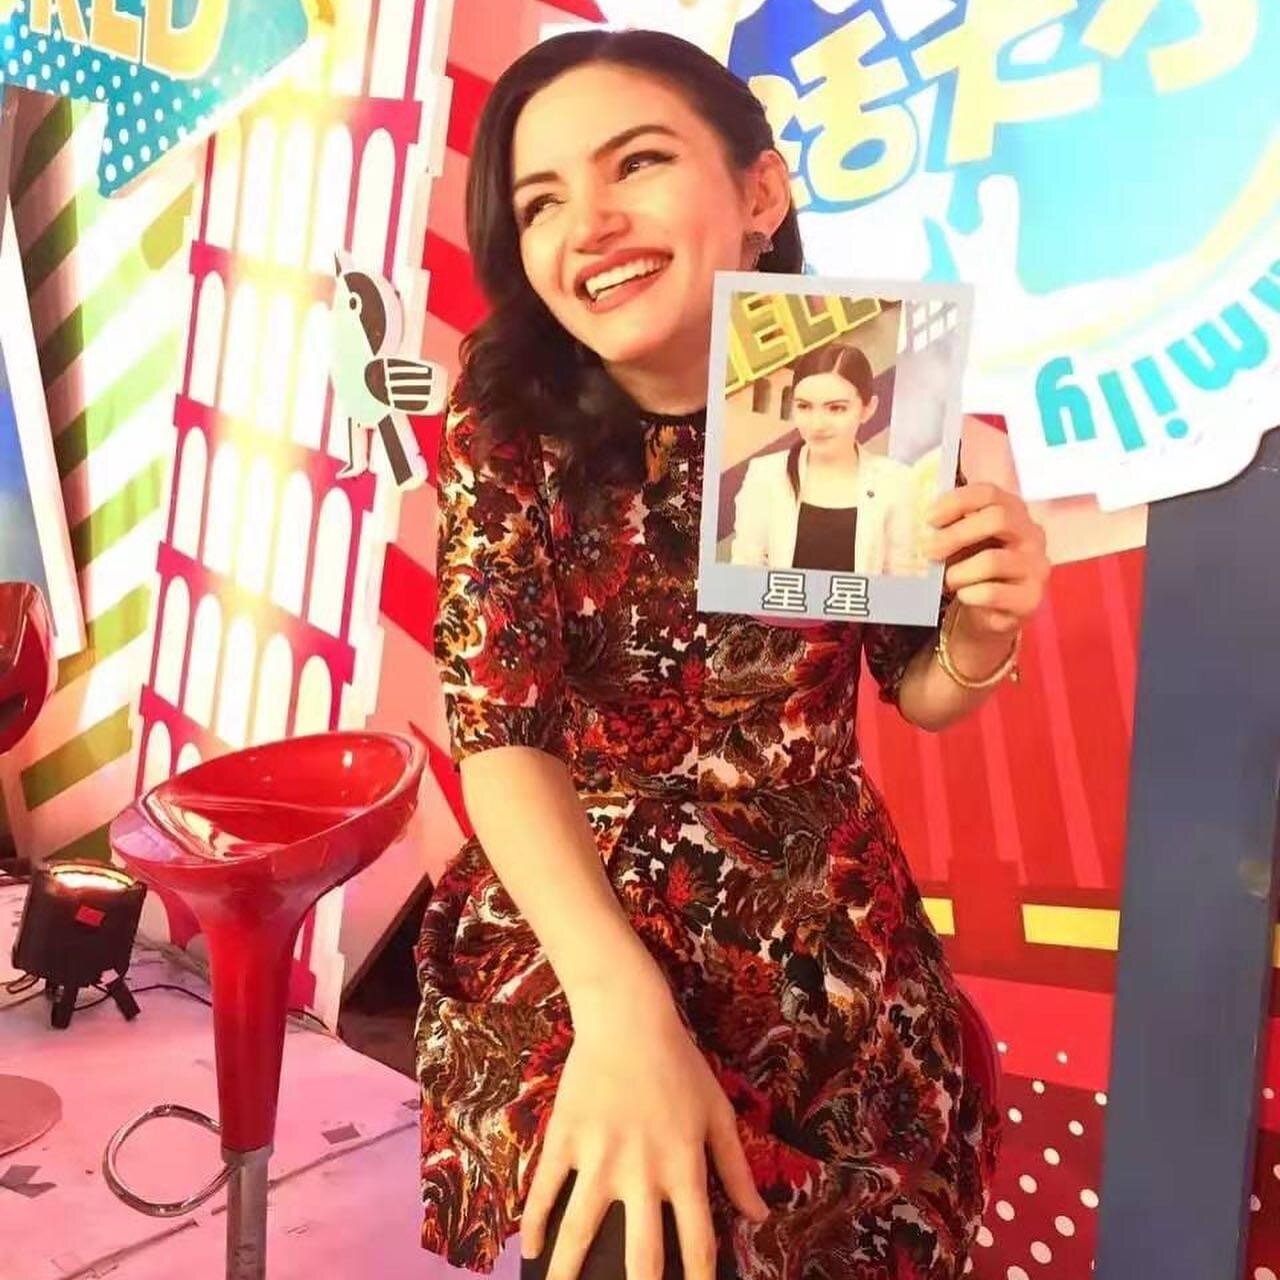 Astrid Poghosyan’s appearances representing Armenia on the TV show '生活大不同 - WE ARE FAMILY'.